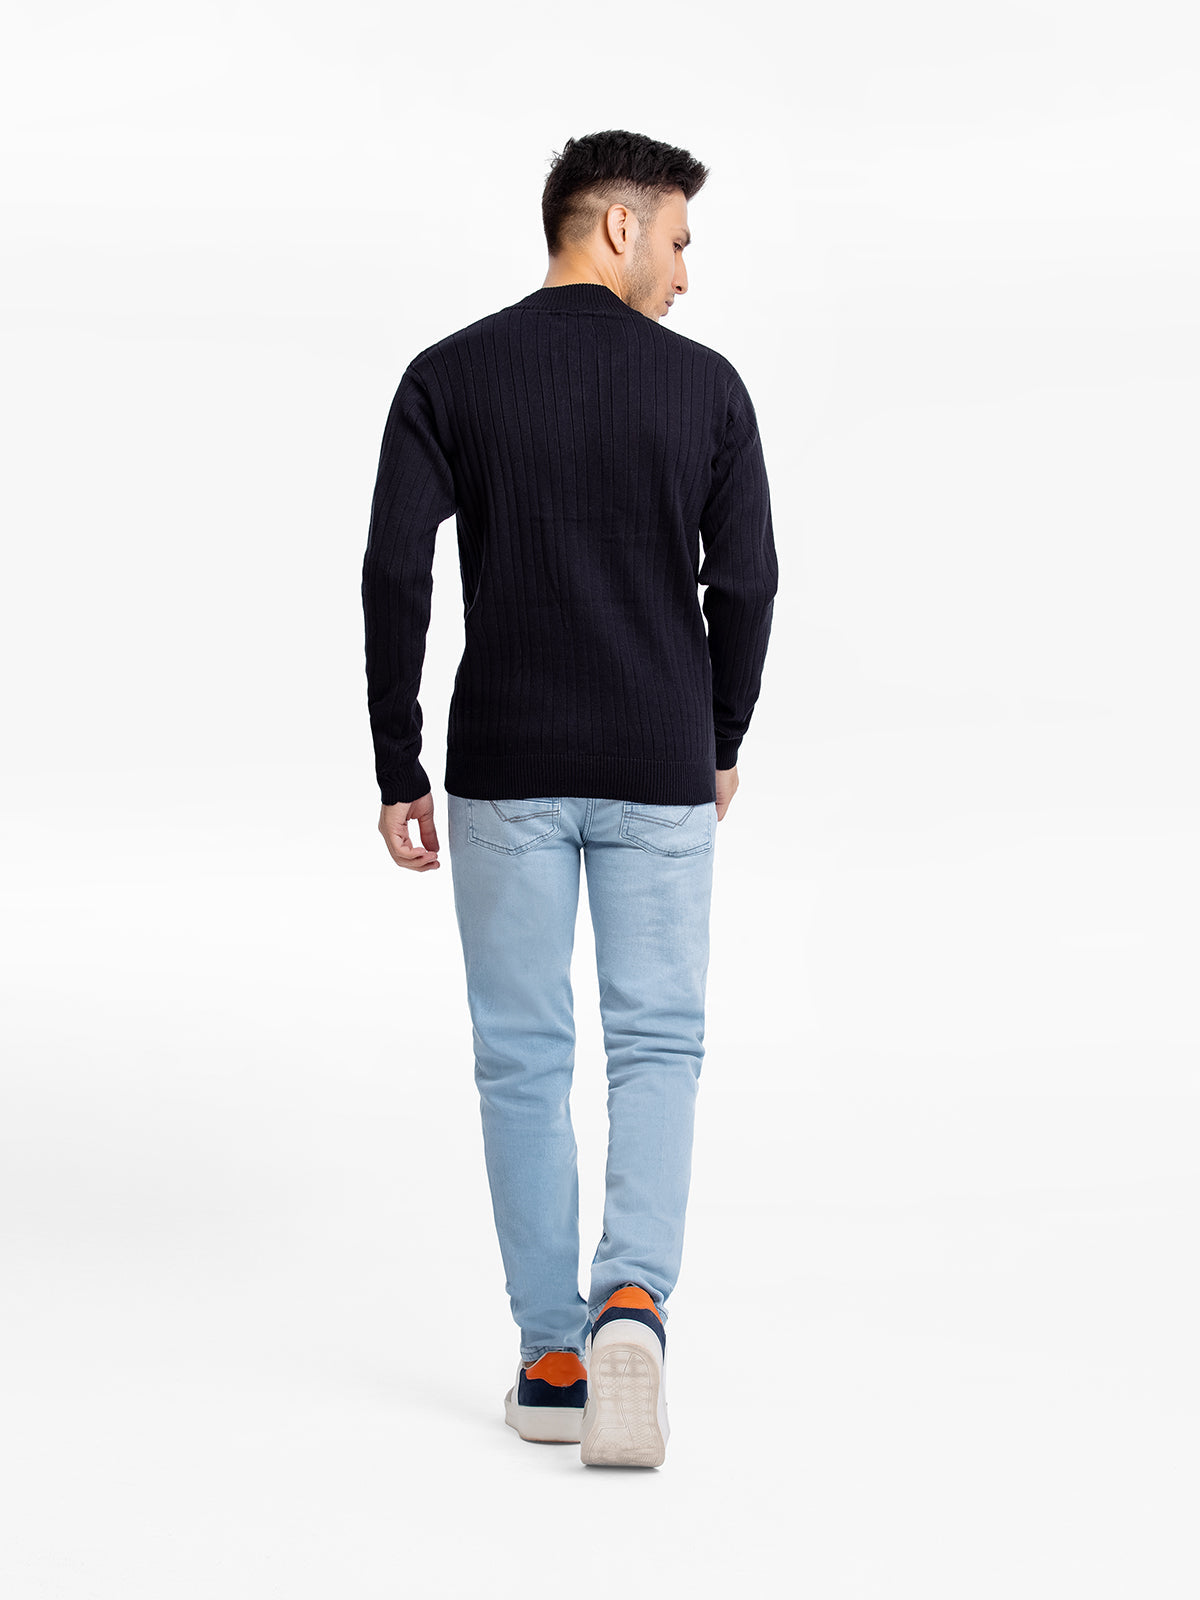 Mock Neck Sweater - FMTSWT22-006